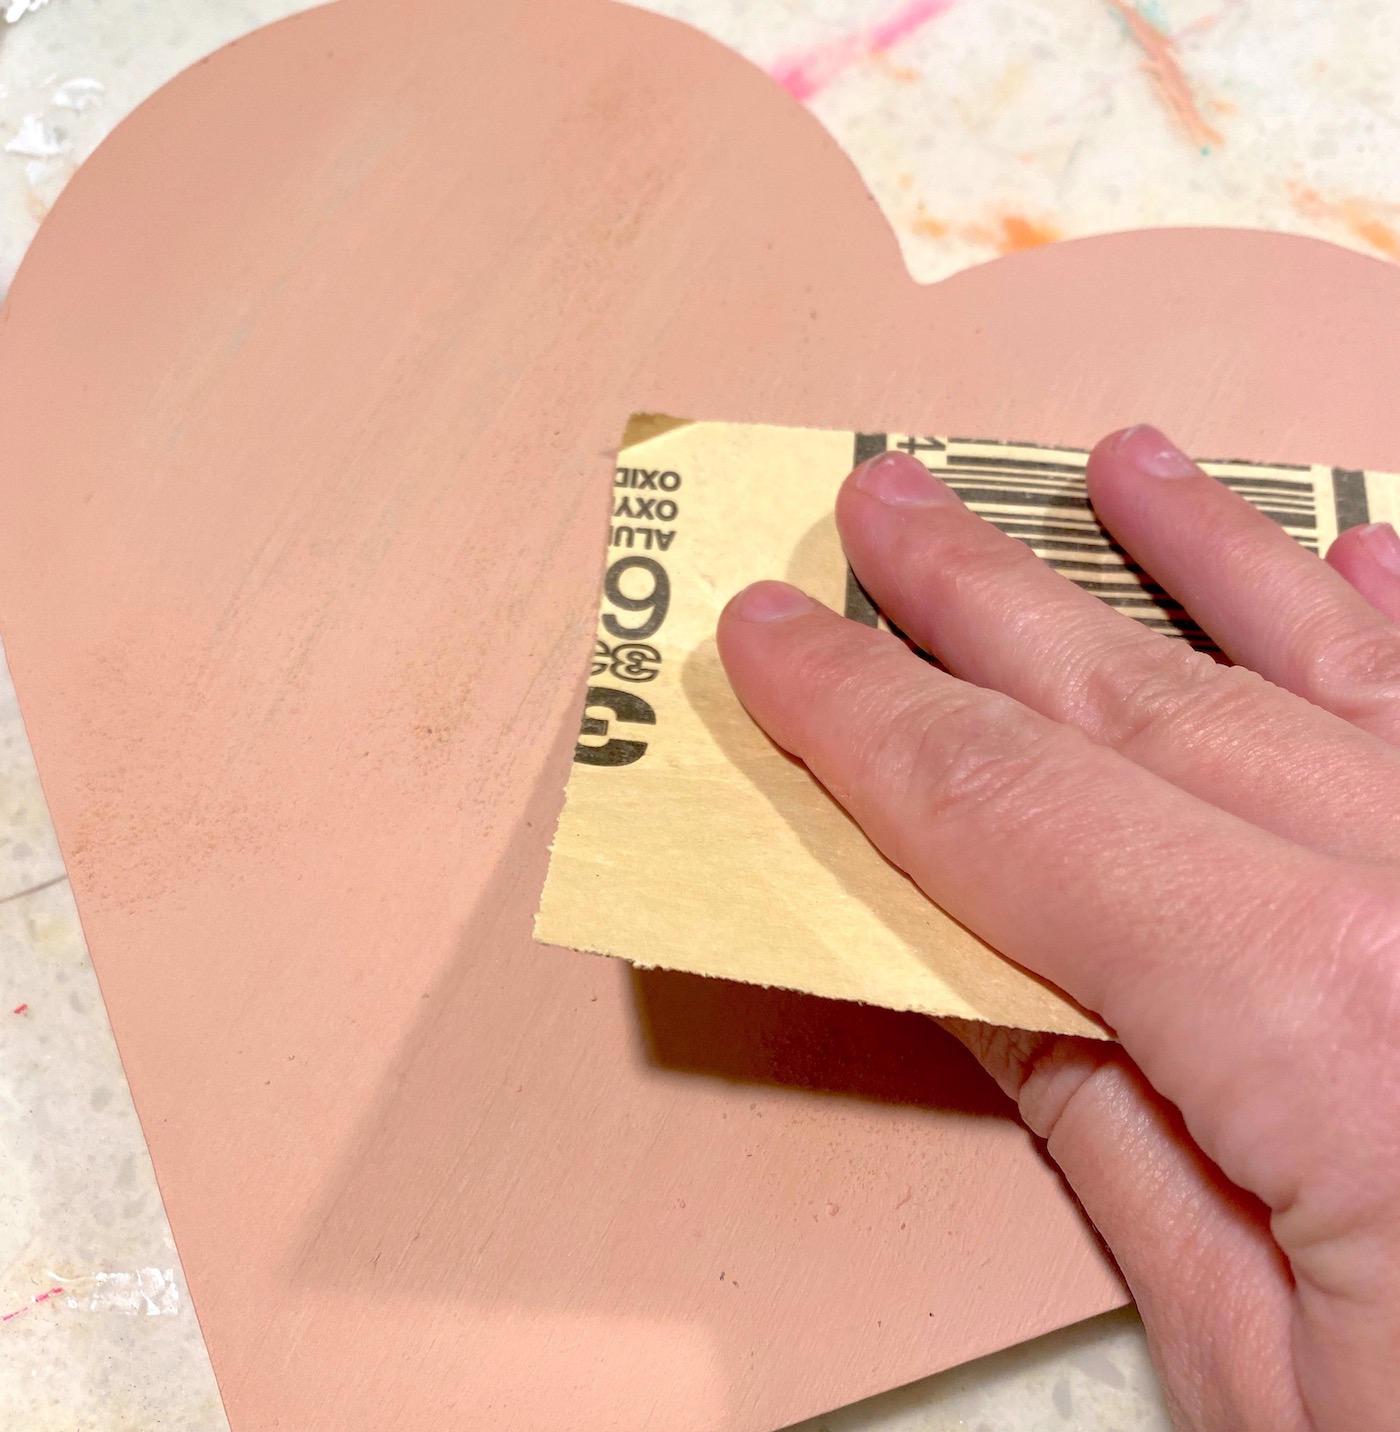 Distress the heart with sandpaper